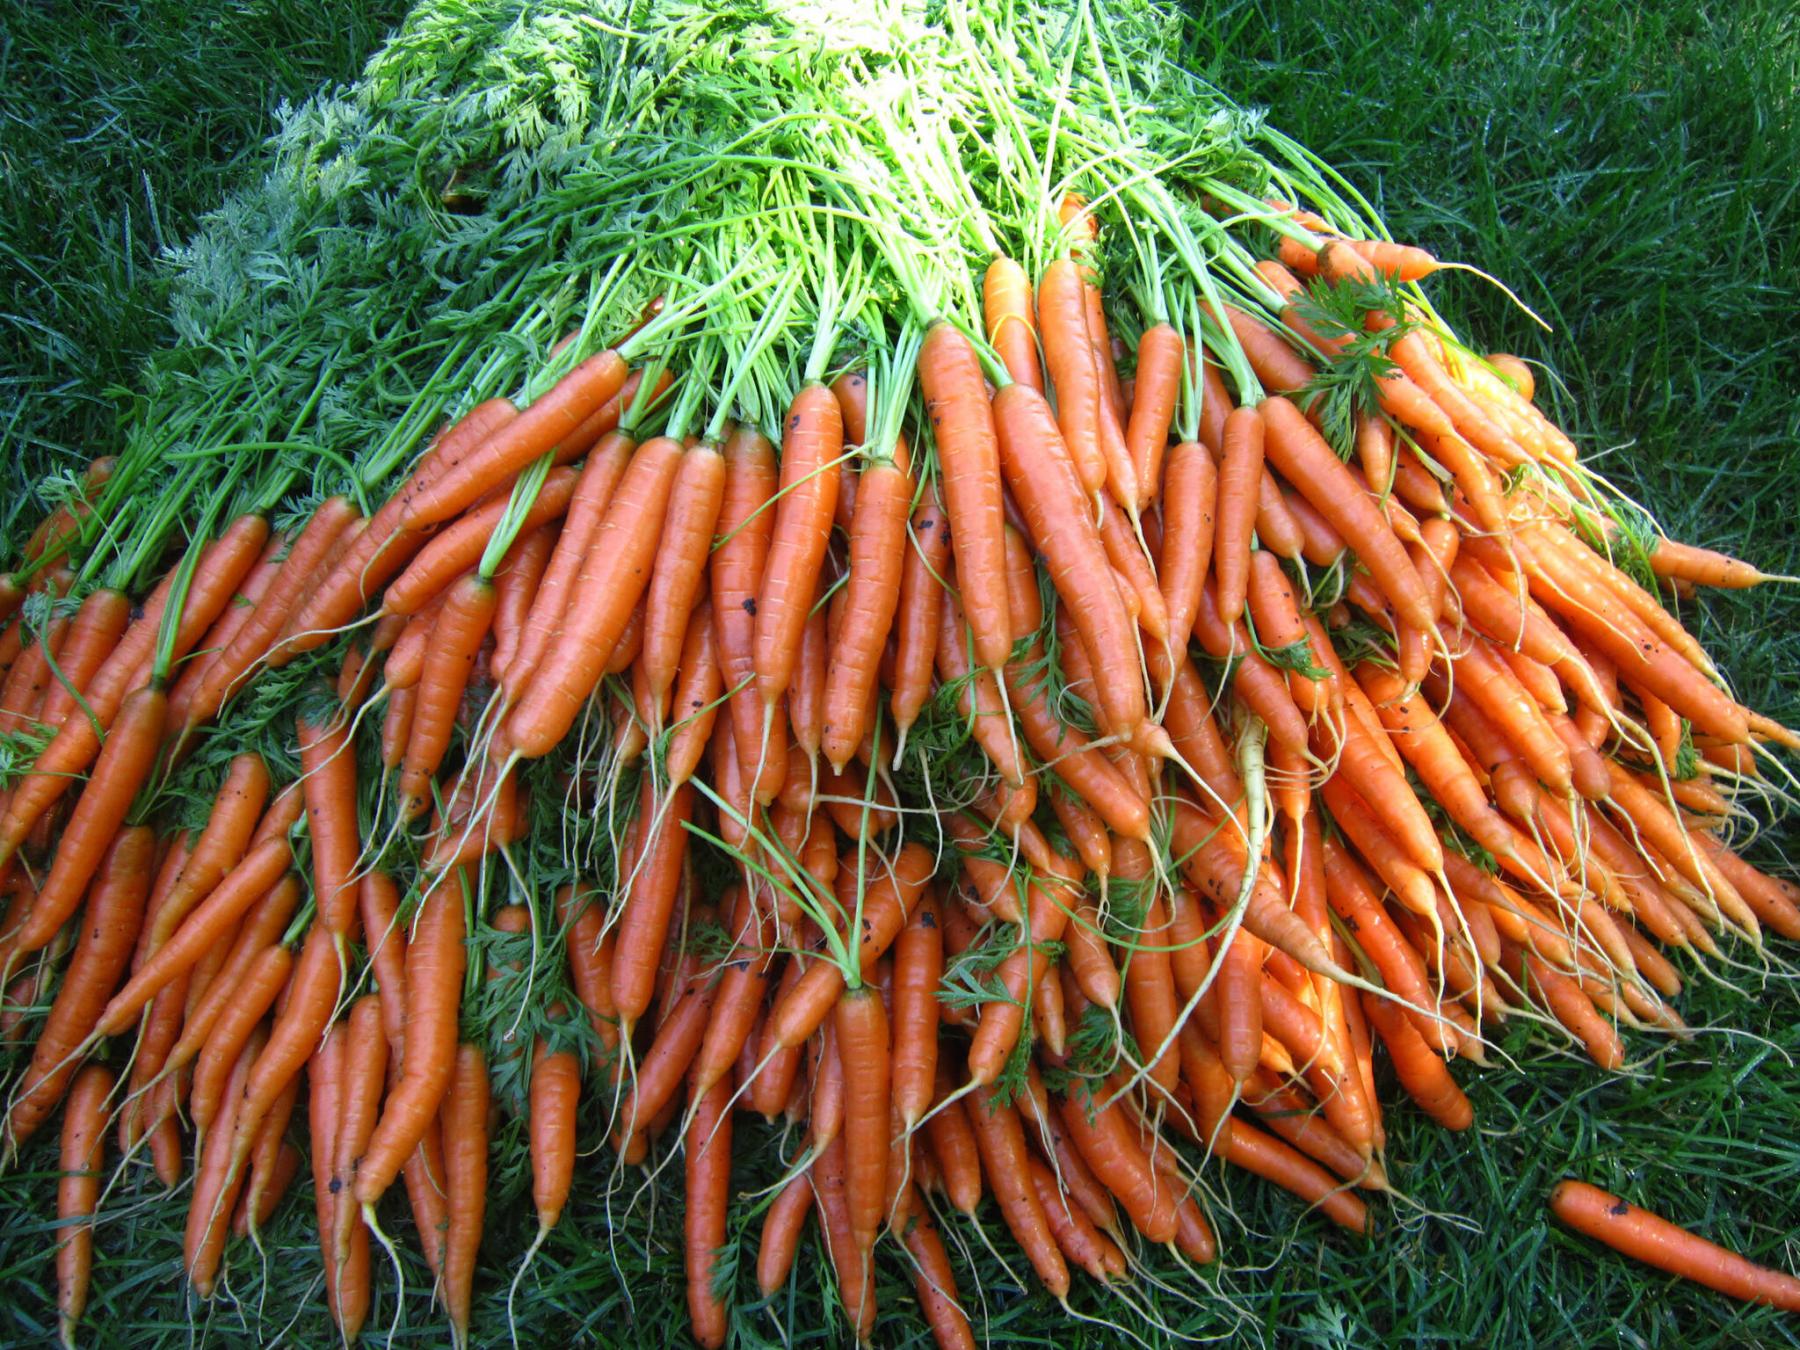 <p>Photos by Tiffany Grenkow</p><p>Sow carrot seeds by July 1 and you could be harvesting a big bunch of carrots starting mid-August.</p>